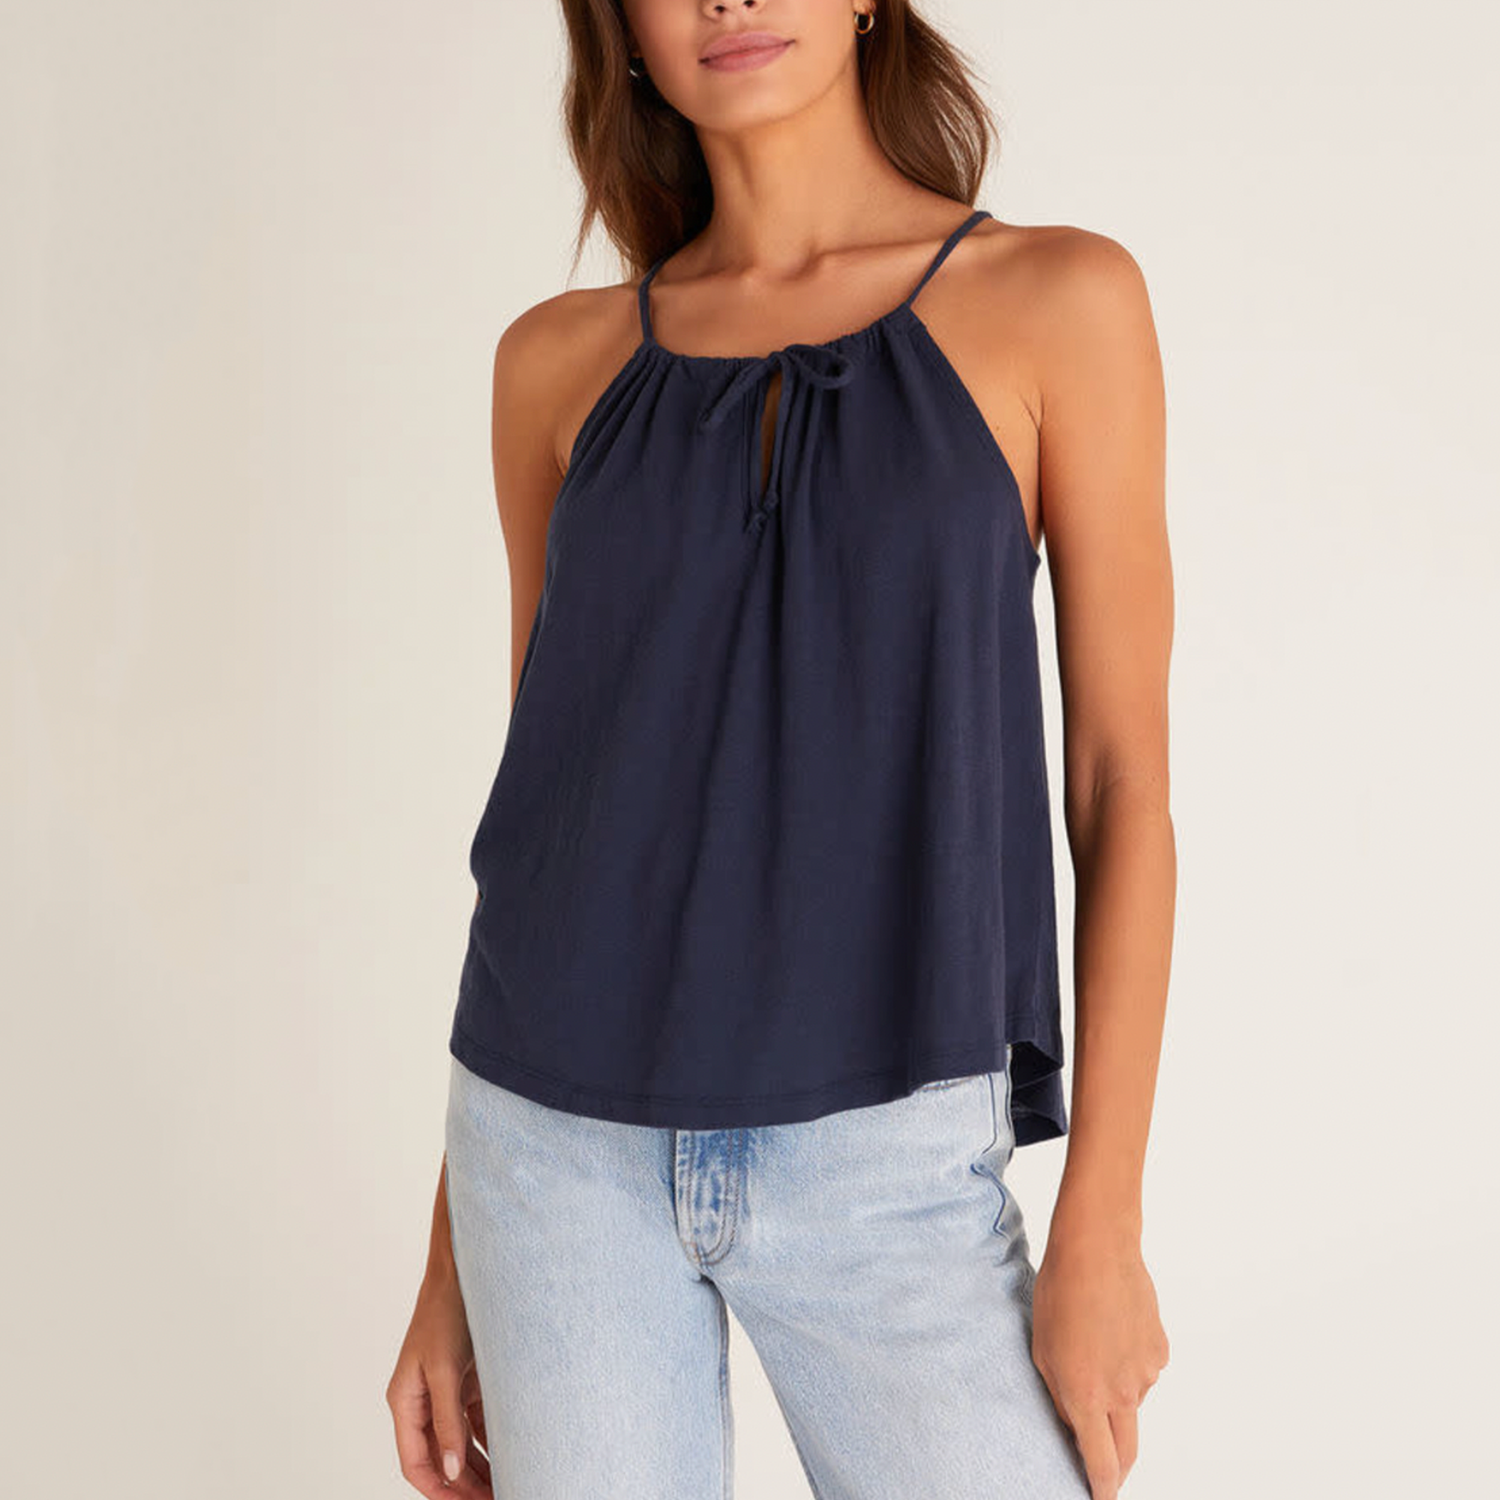 Z Supply Daphne Tank. An iconic summer silhouette, the Daphne Tank takes the spaghetti strap, keyhole look to a new level of comfort. Made using a lightweight fabric, this tank has a relaxed, flowy feel and pairs perfectly with fitted denim or shorts